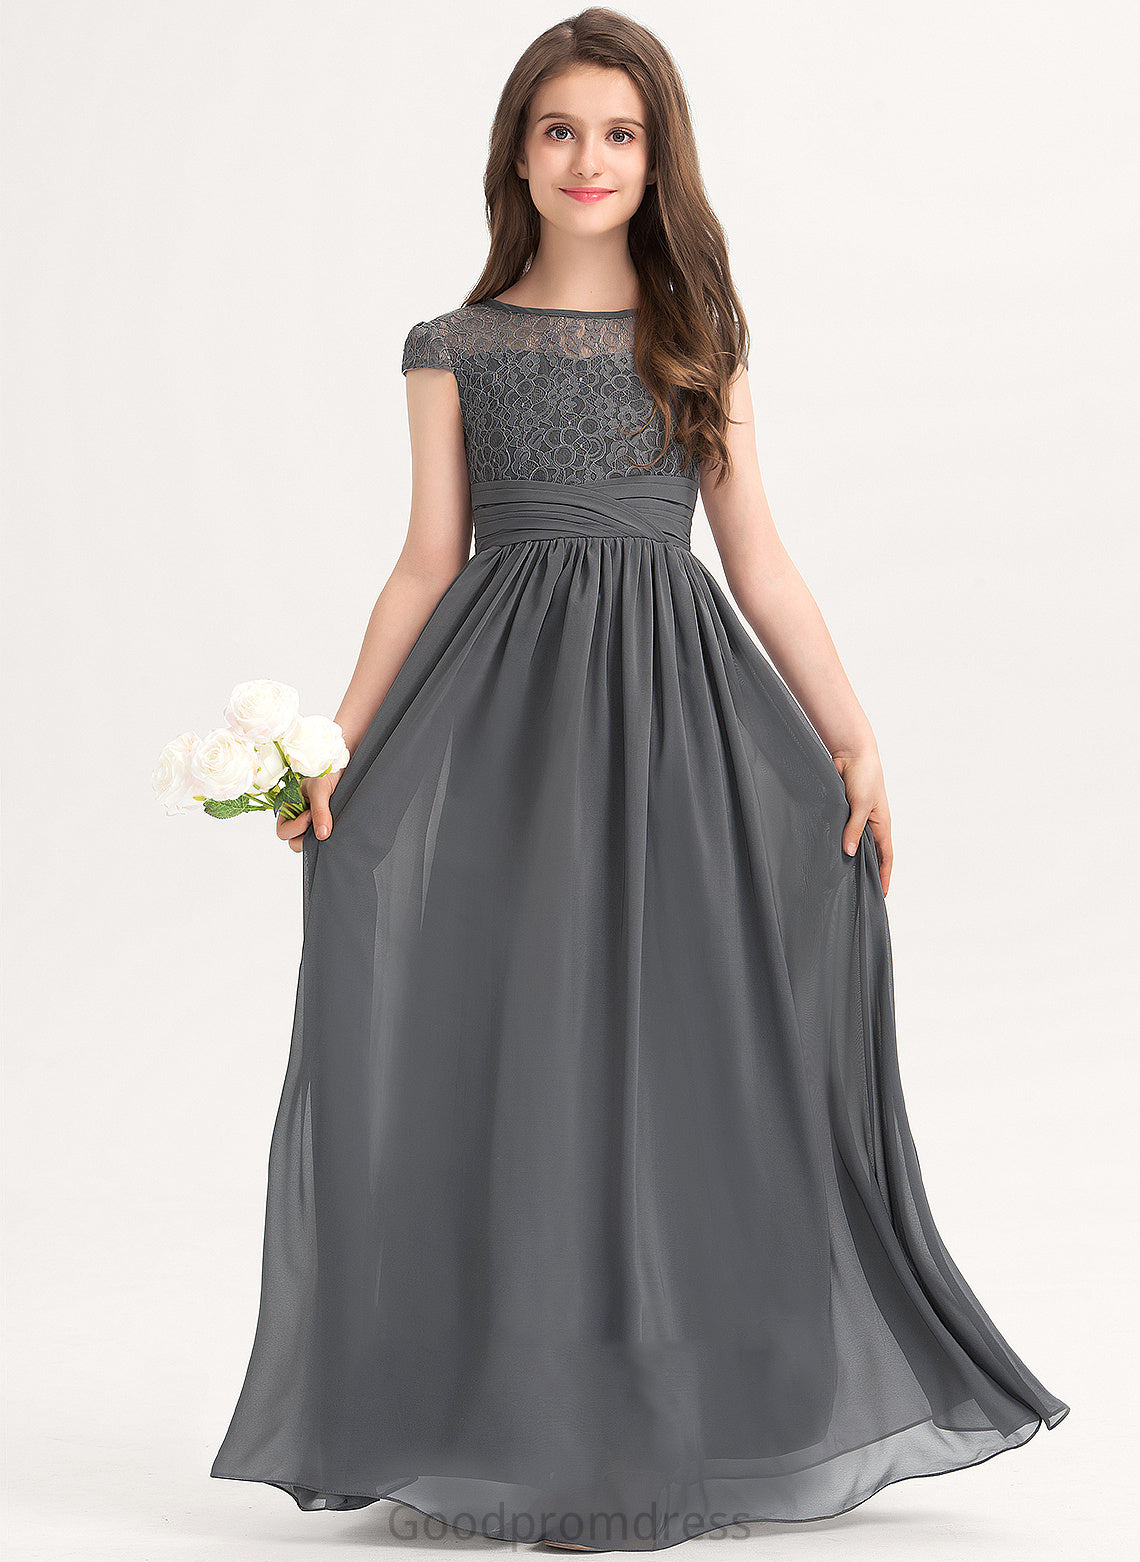 Lace Junior Bridesmaid Dresses Floor-Length A-Line With Scoop Chiffon Ruffle Mariam Neck